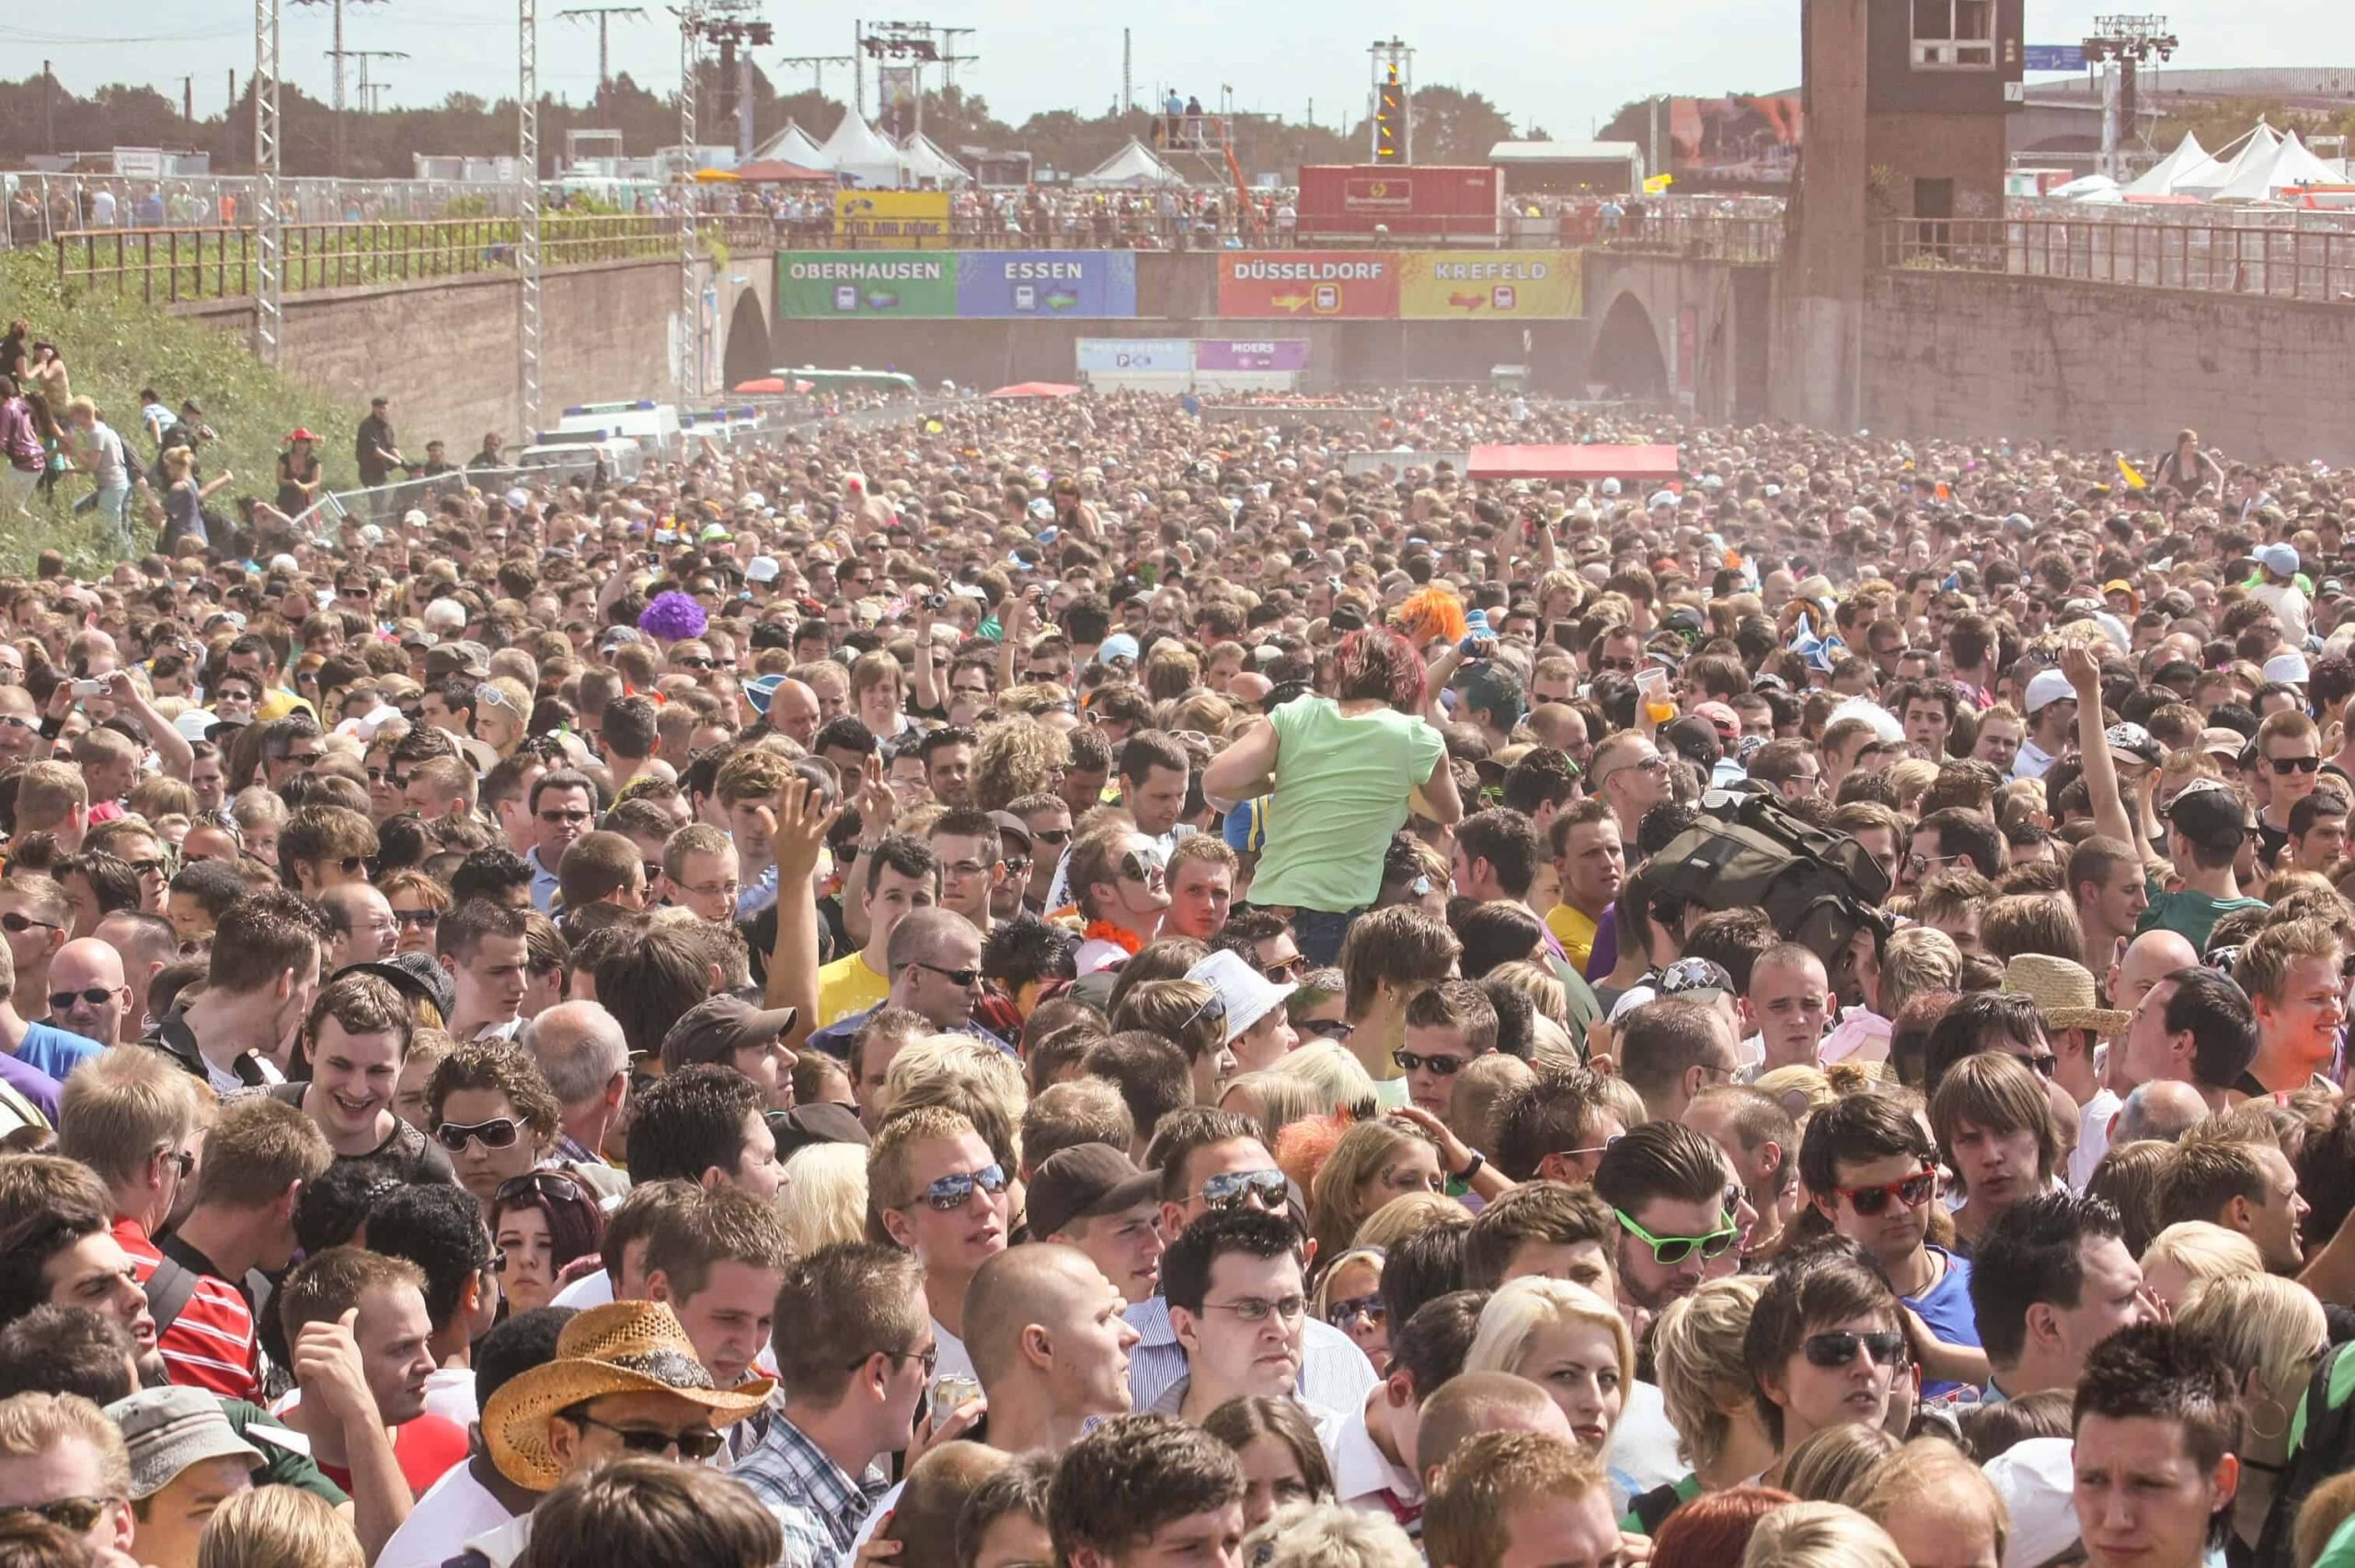 Rave The Planet will revive Berlin’s techno Love Parade in 2022